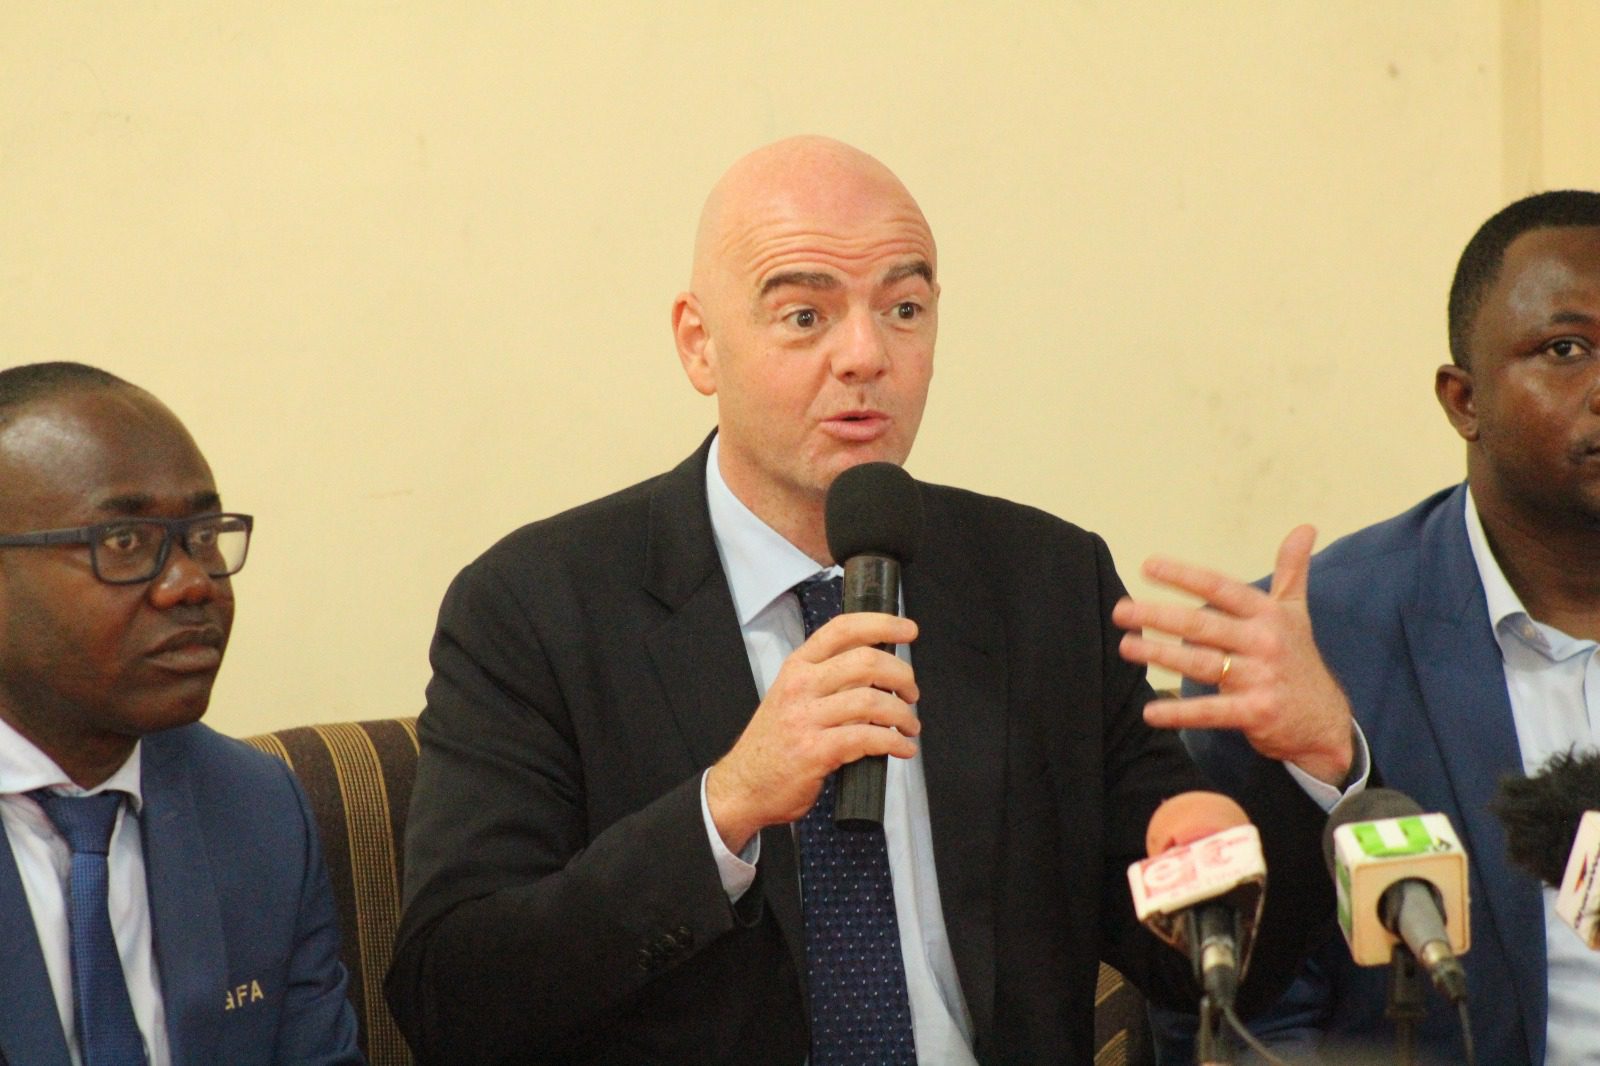 FIFA President, Gianni Infantino [in the middle] speaks to the Press in Accra as GFA President, Kwesi Nyantakyi [left] and Mr. Ibrahim Sannie Darra, GFA Communications Director [right] looks on.